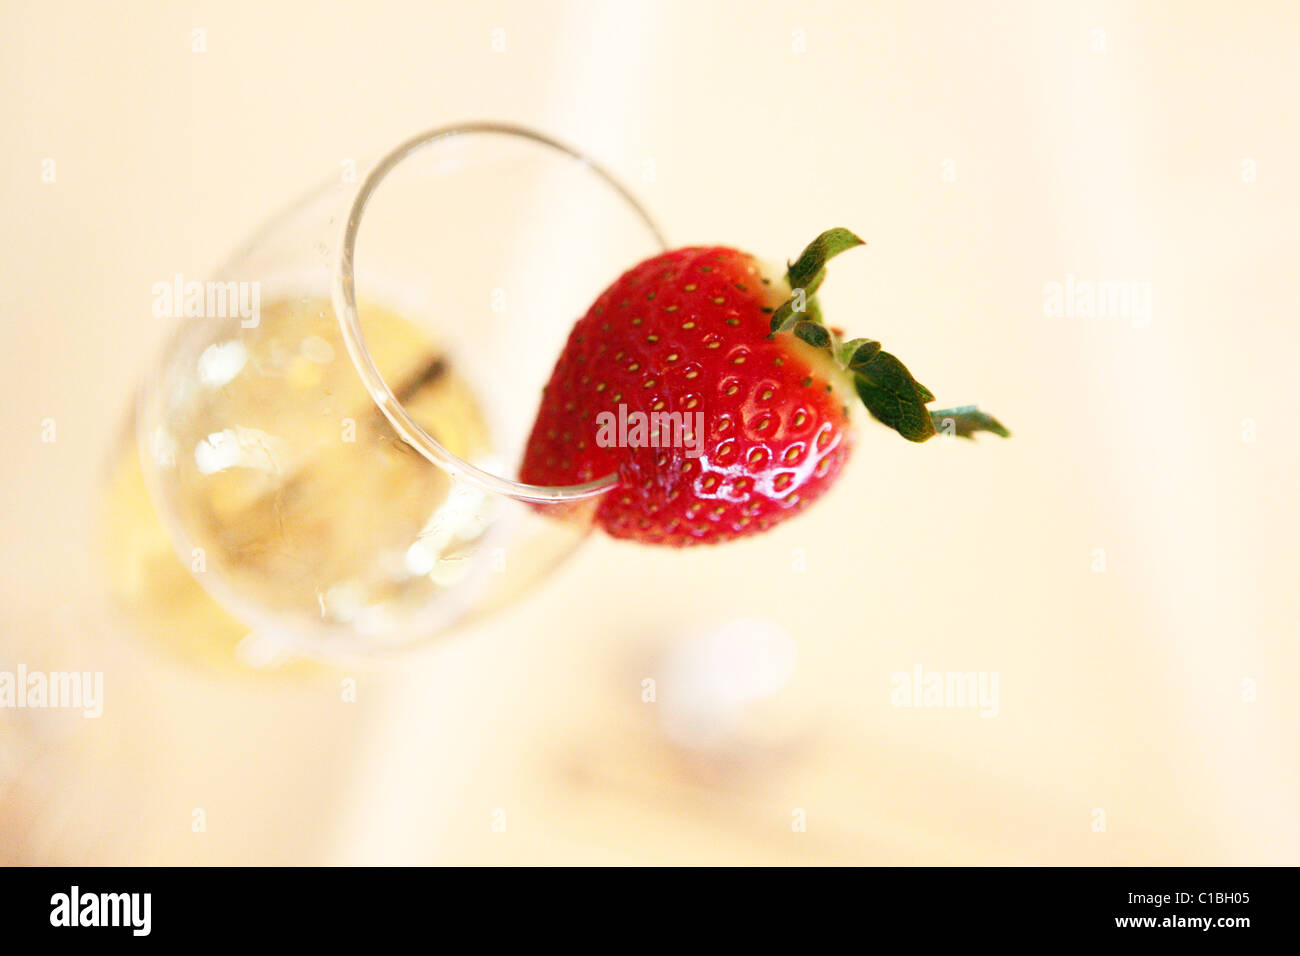 CHAMPAGNE GLASS STRAWBERRY DRINK DECOR ALCOHOL DRINKING Stock Photo